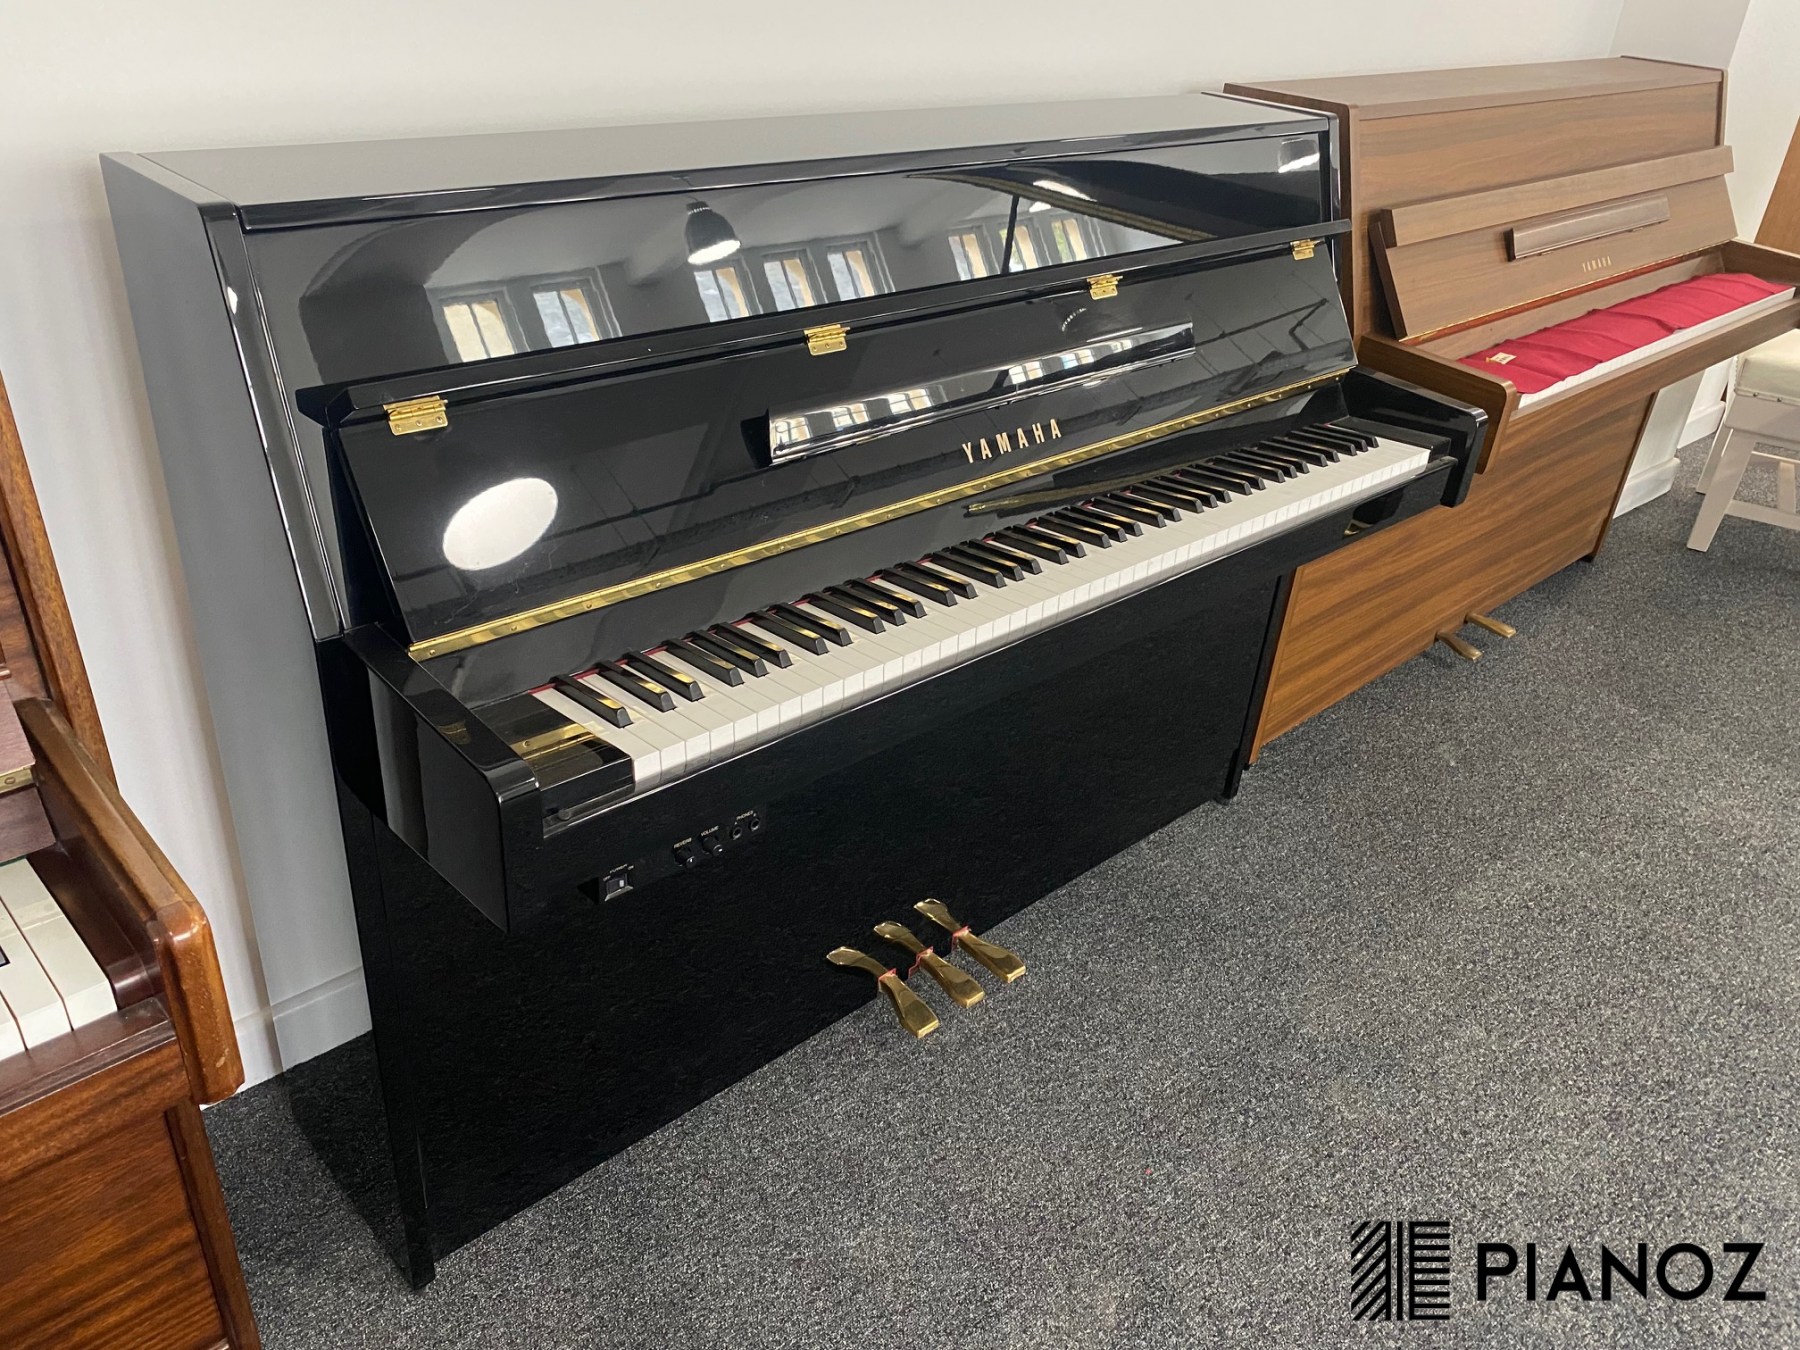 Yamaha B1 Silent Upright Piano piano for sale in UK